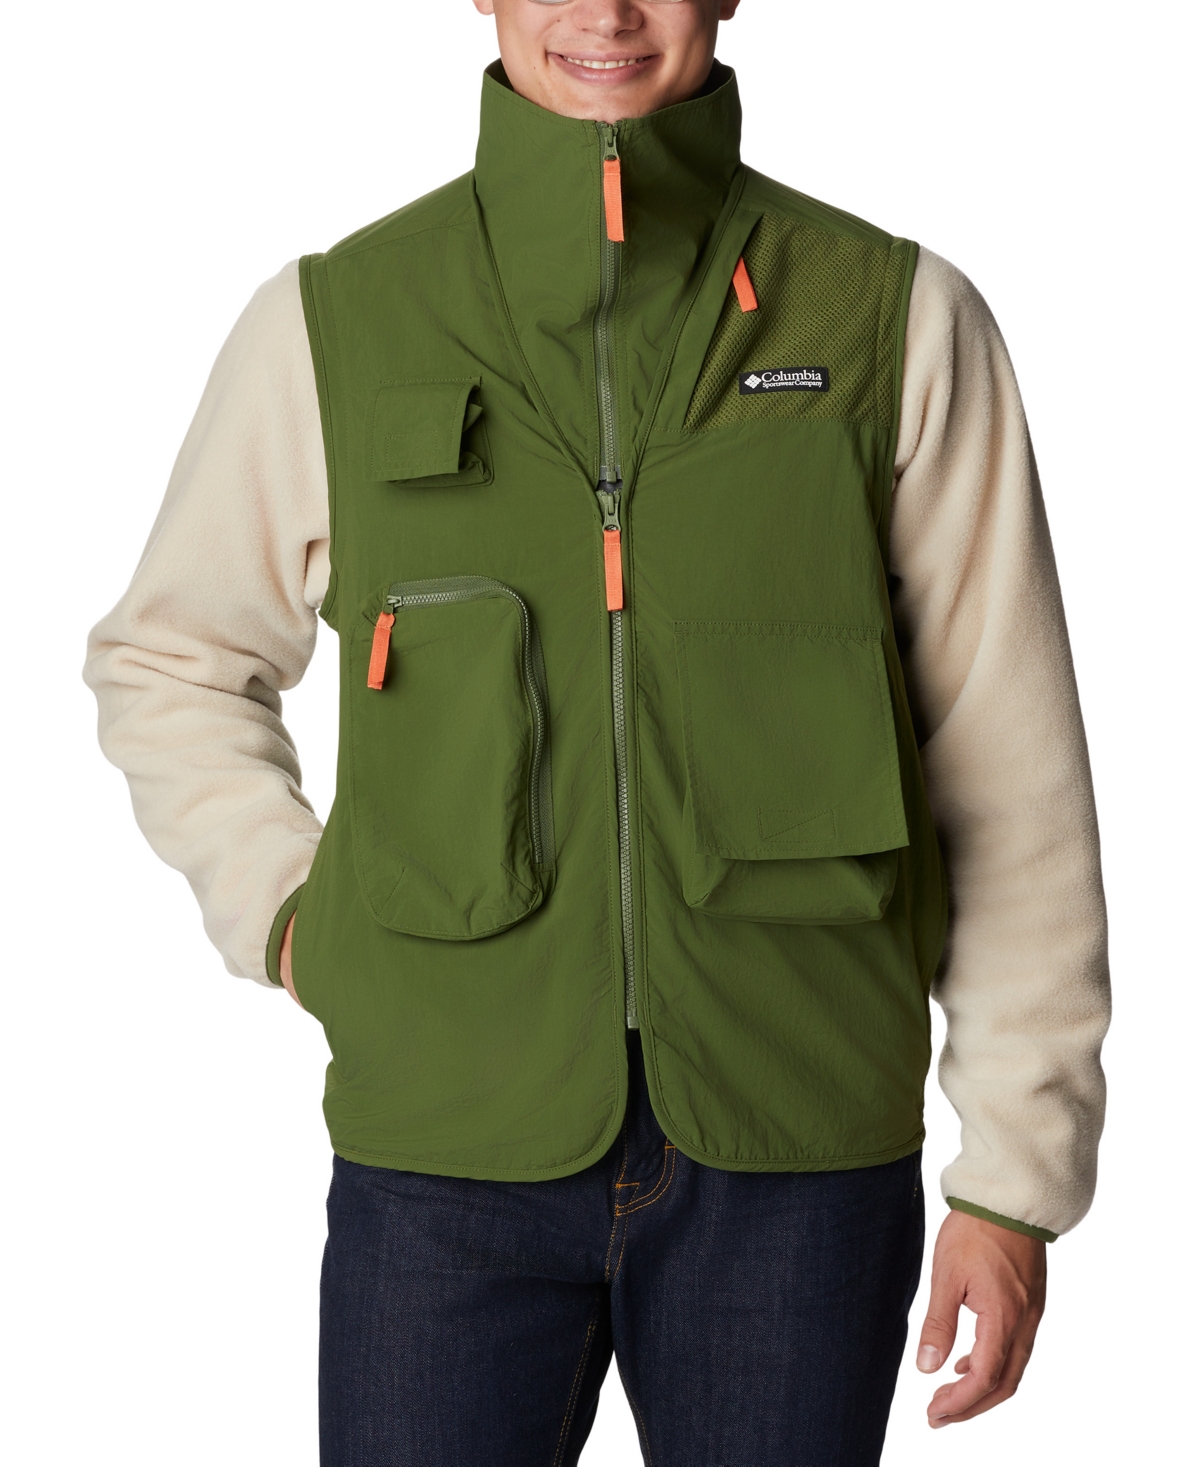 Columbia Men's Skeena River Colorblocked Mix-Media Jacket with Removable Sleeves